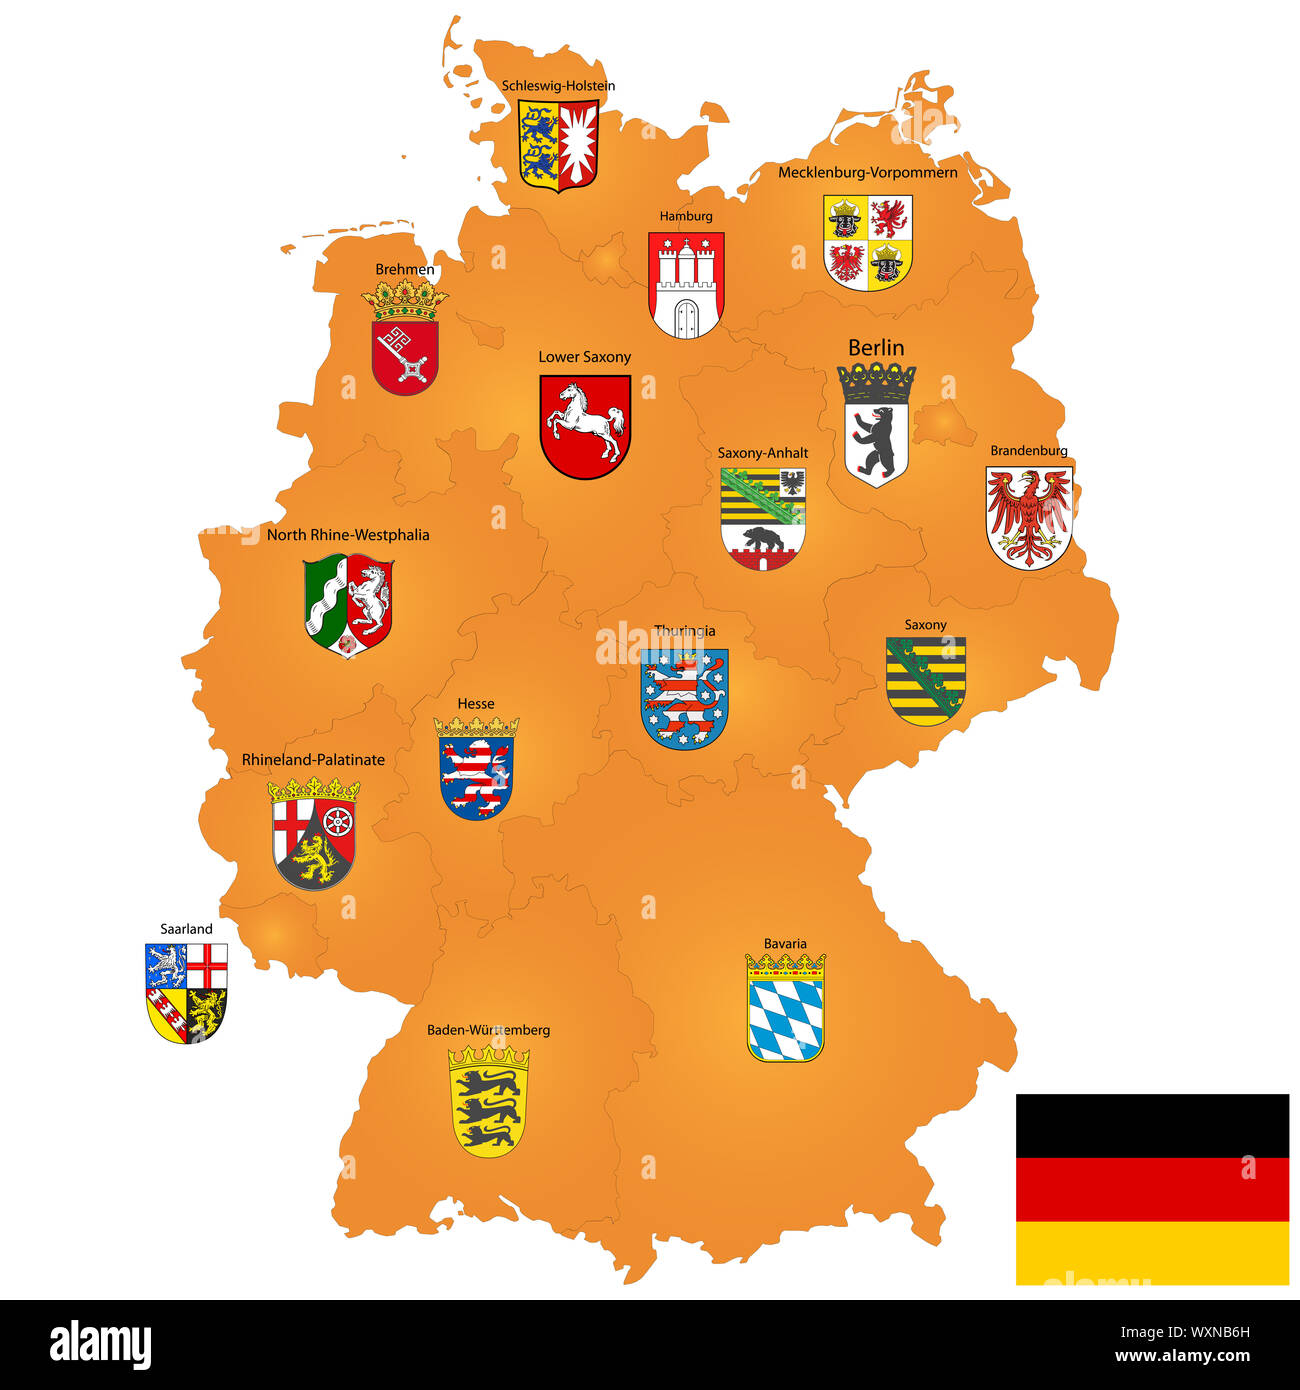 Detailed map of Germany with coat of arms and borders Stock Photo